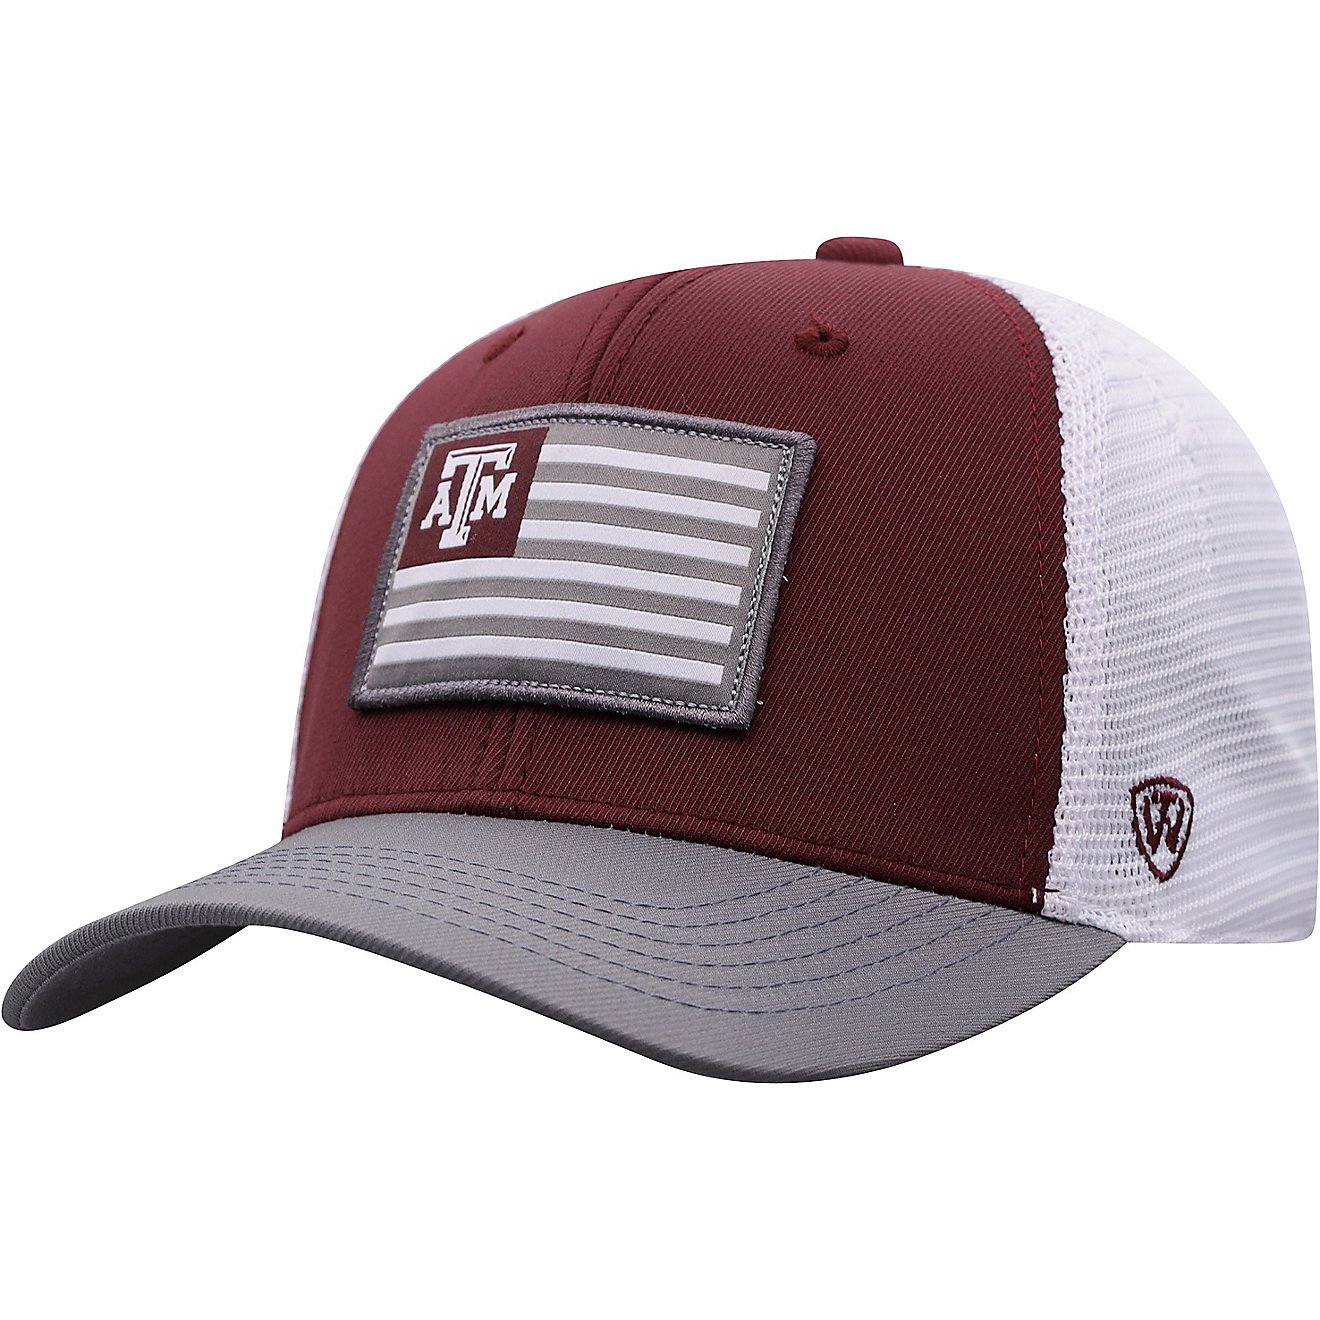 Top of the World Texas A&M University Pedigree 1 Fit Cap                                                                         - view number 1